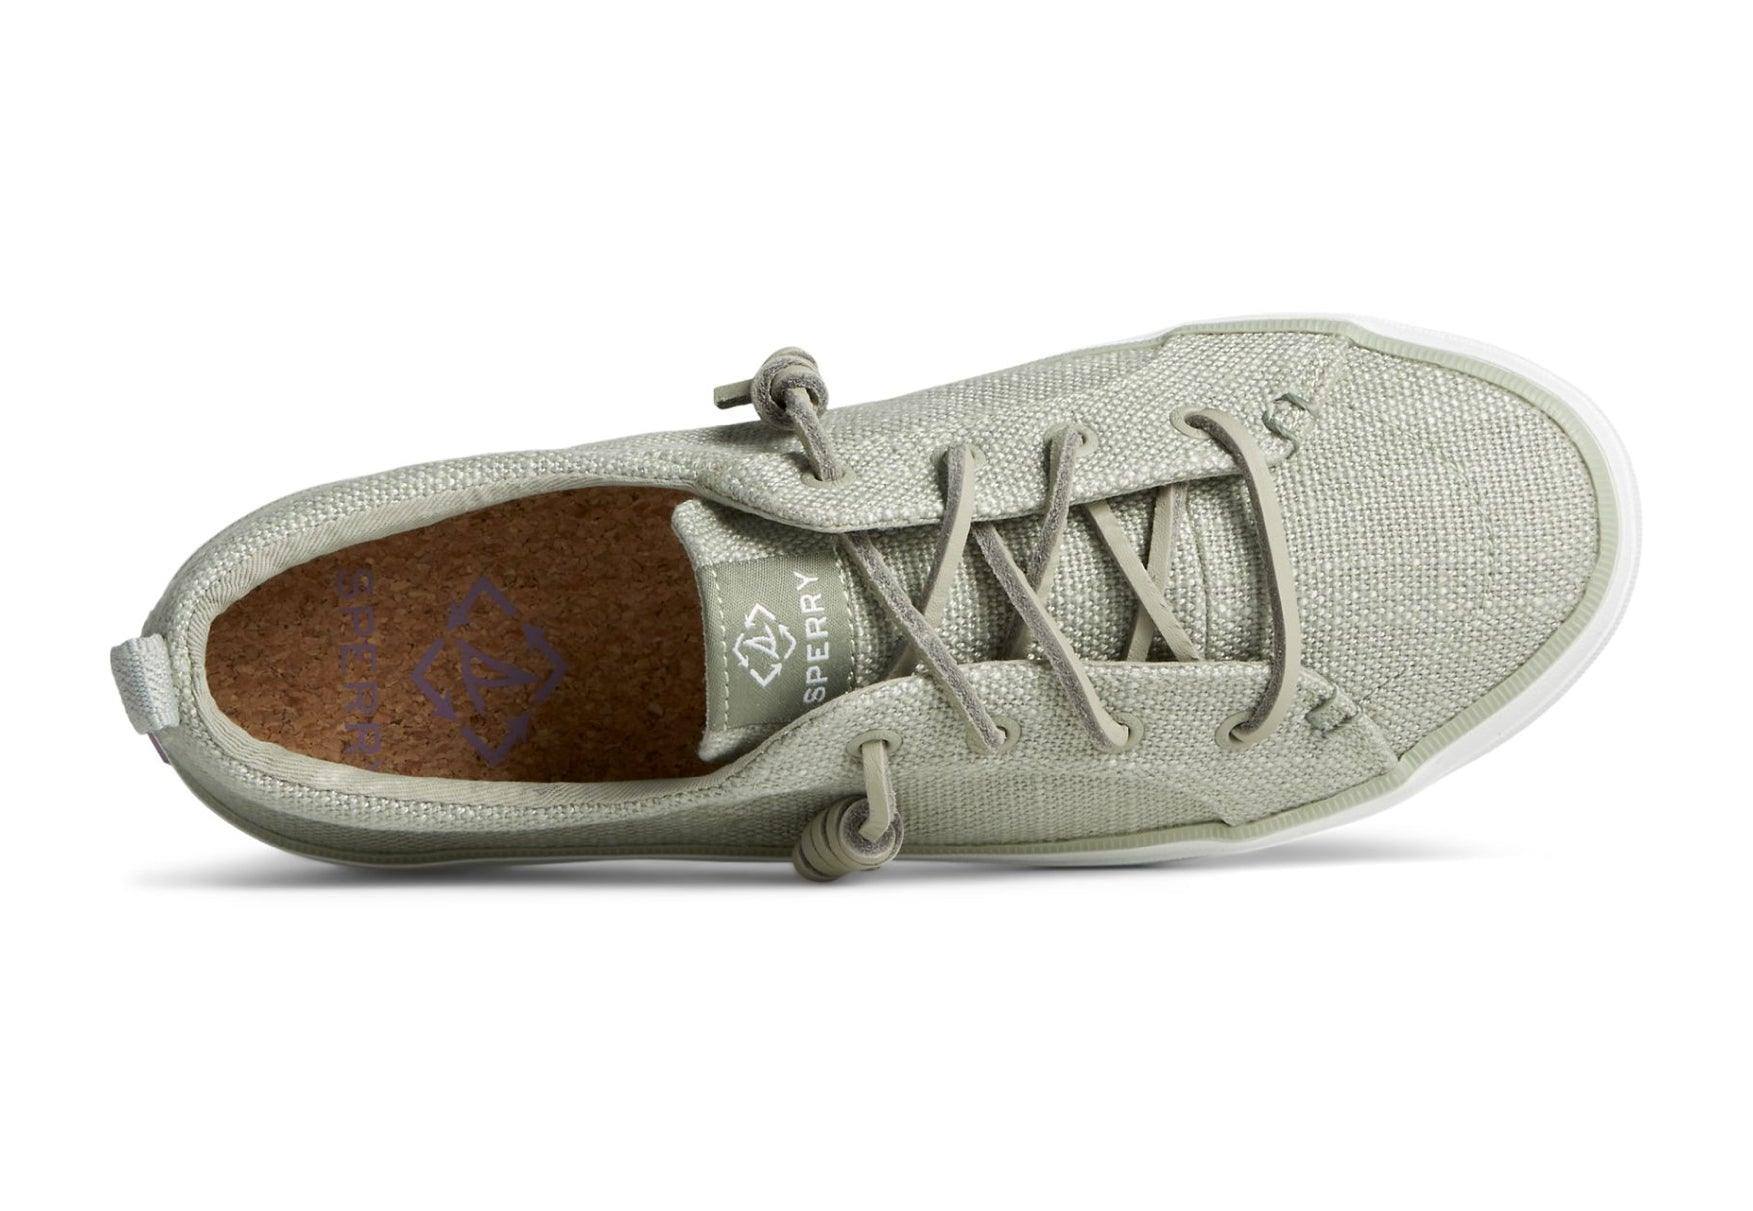 Crest Vibe Linen - The Shoe CollectiveSperry